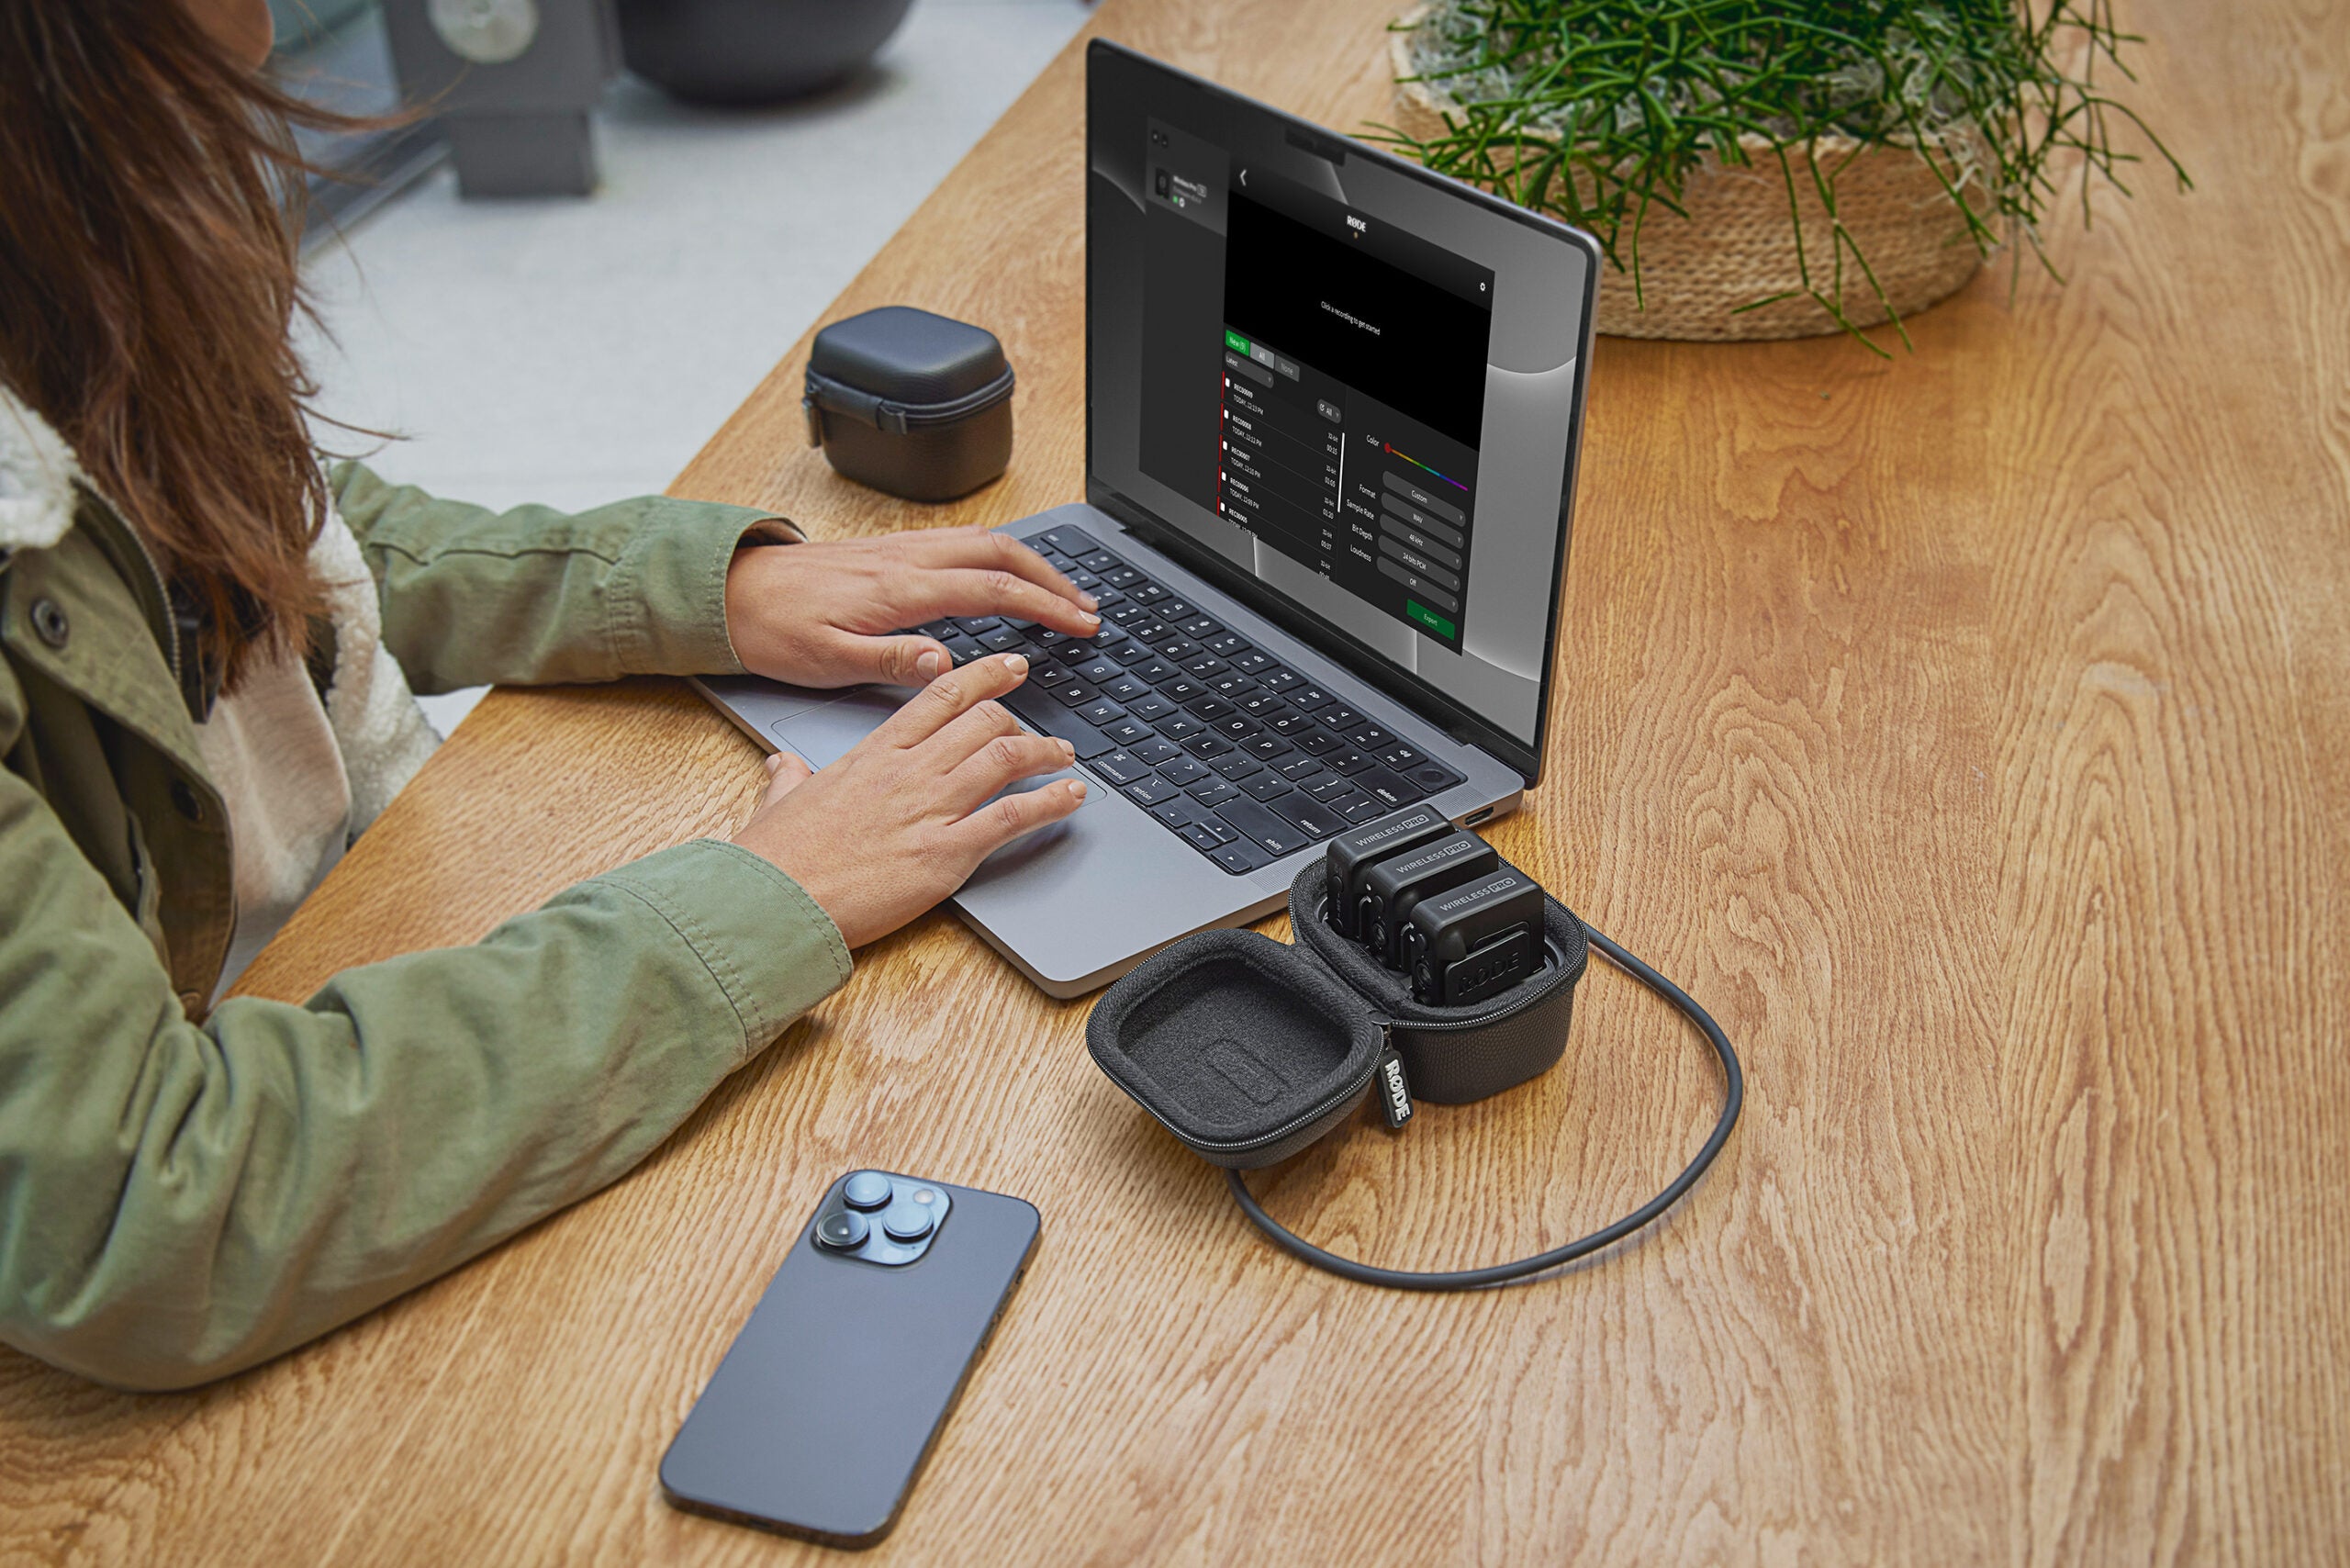 Hands on the keyboard of a laptop with the RÃDE Wireless PRO in the charging case next to it.